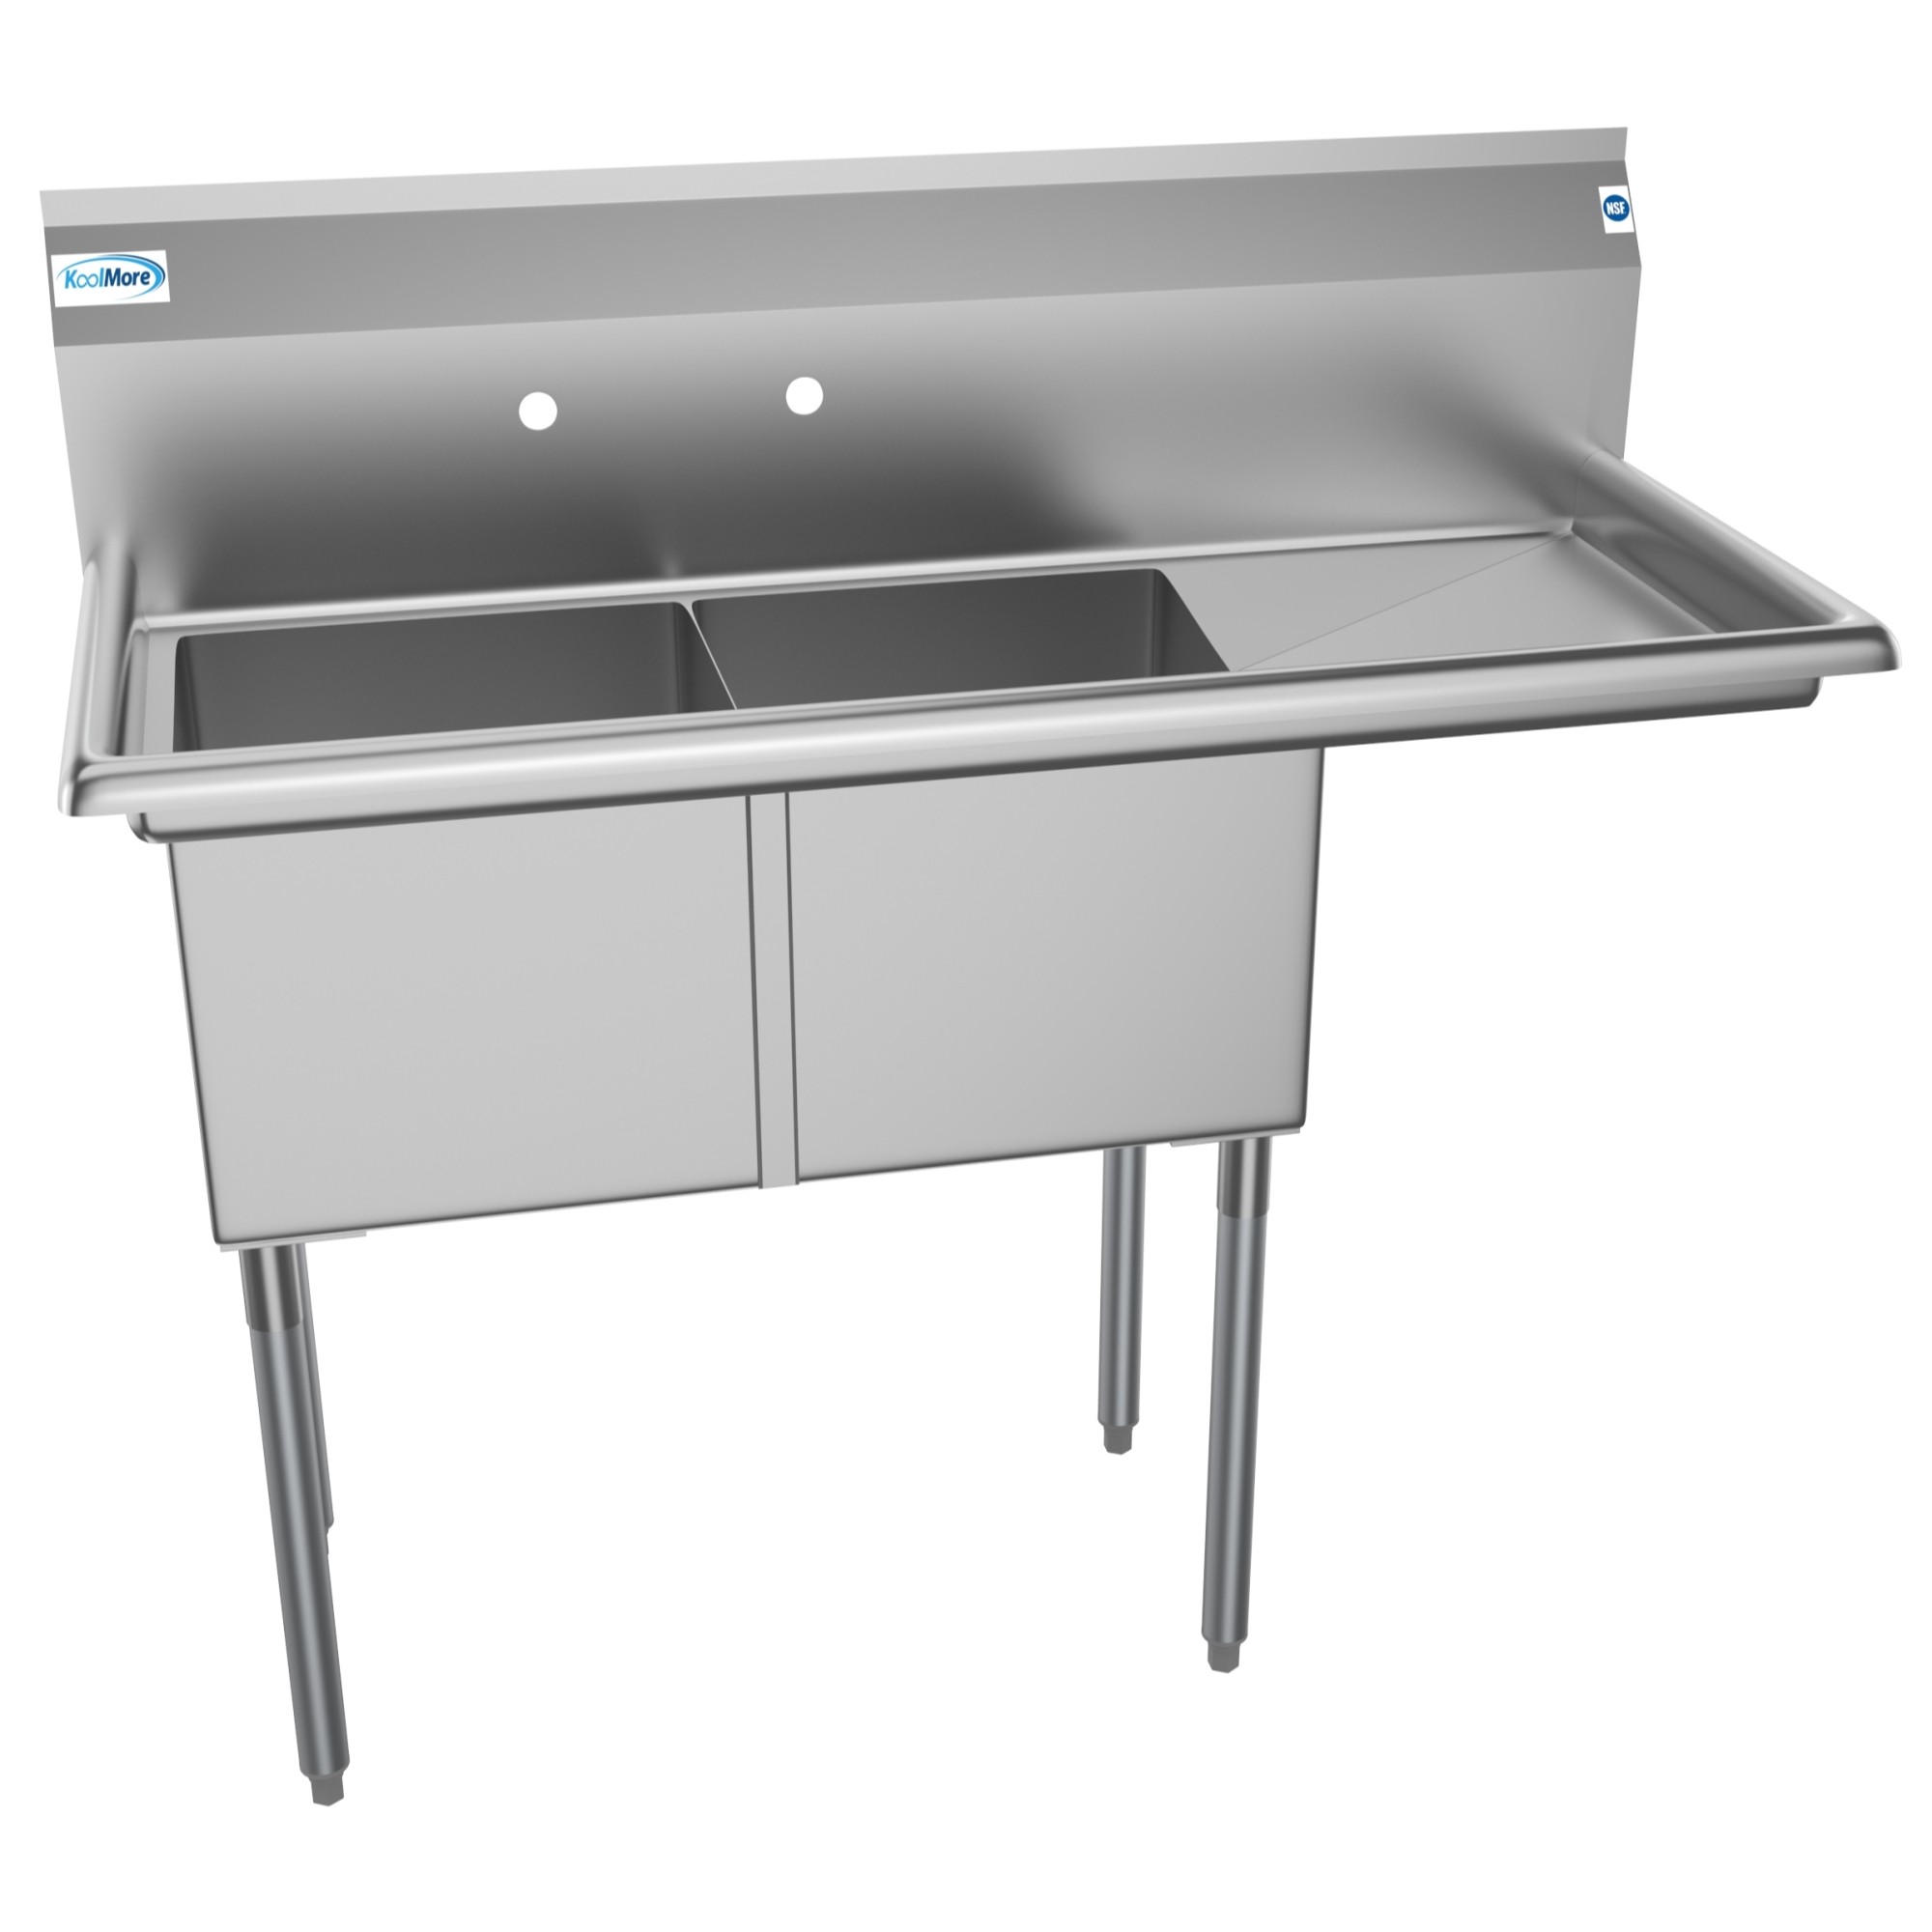 Koolmore SB151512-15R3 48" Two Compartment Stainless Steel Sink with Right Drainboard